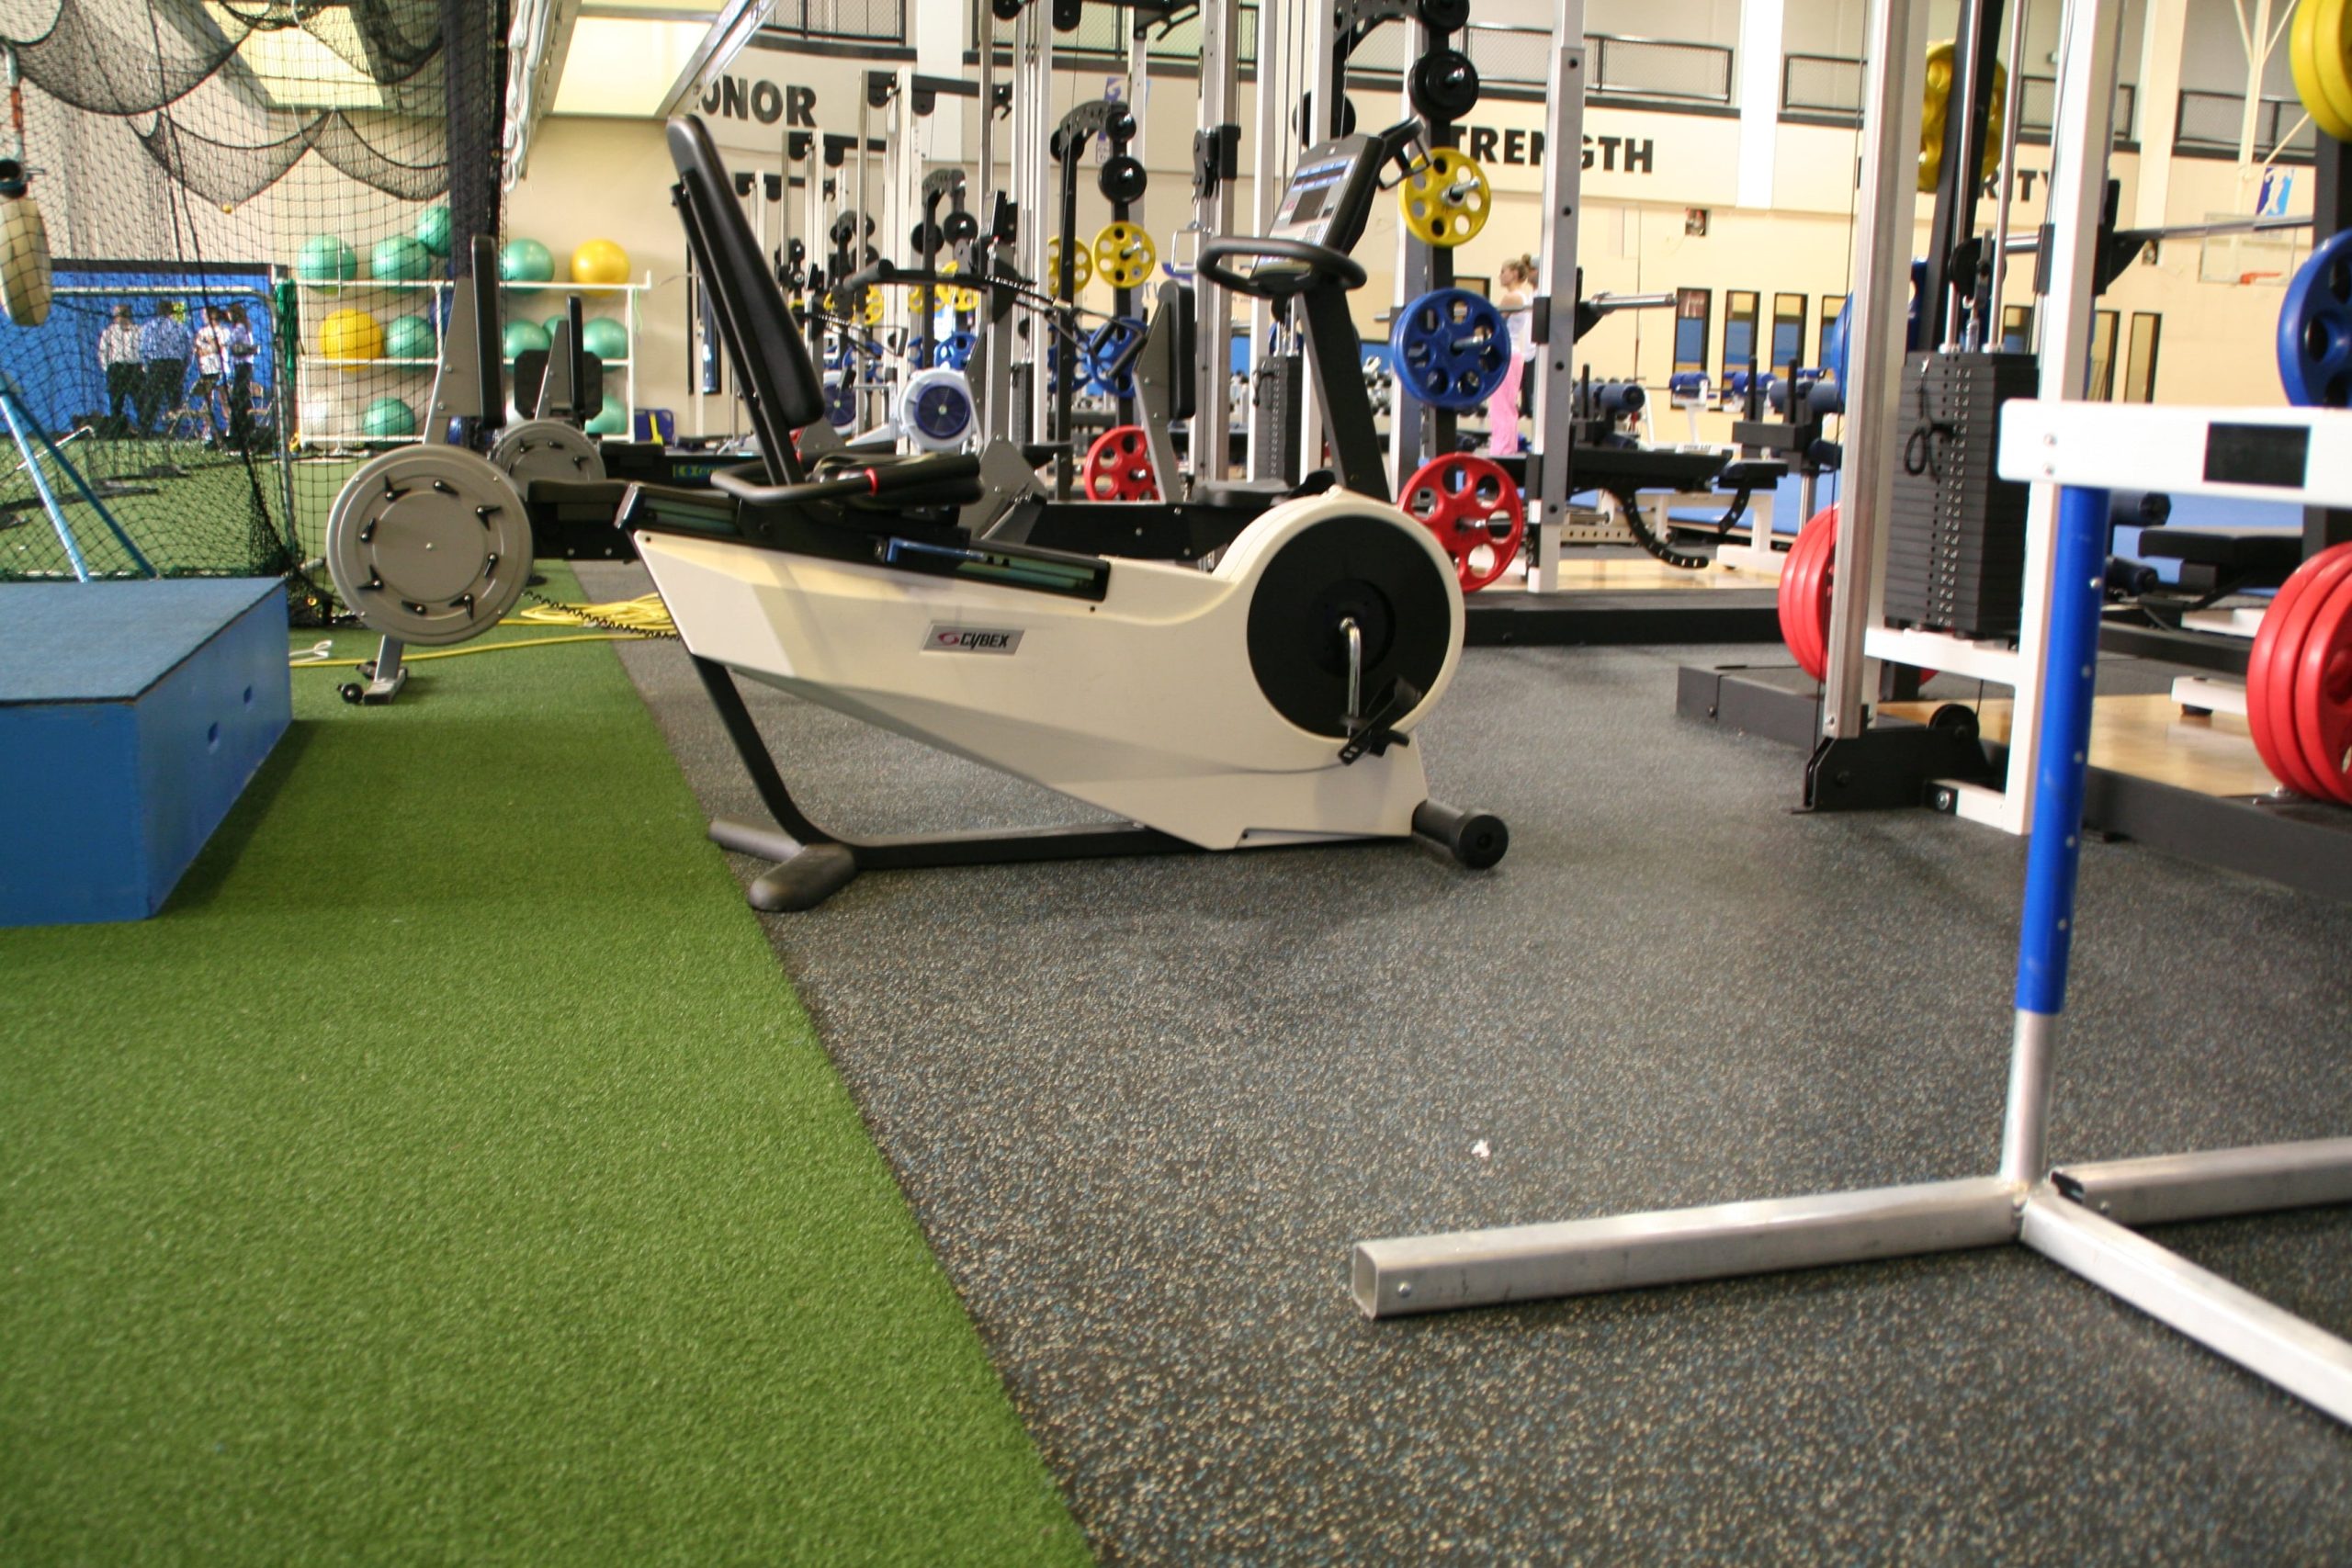 gym equipment sitting on safety surfacing